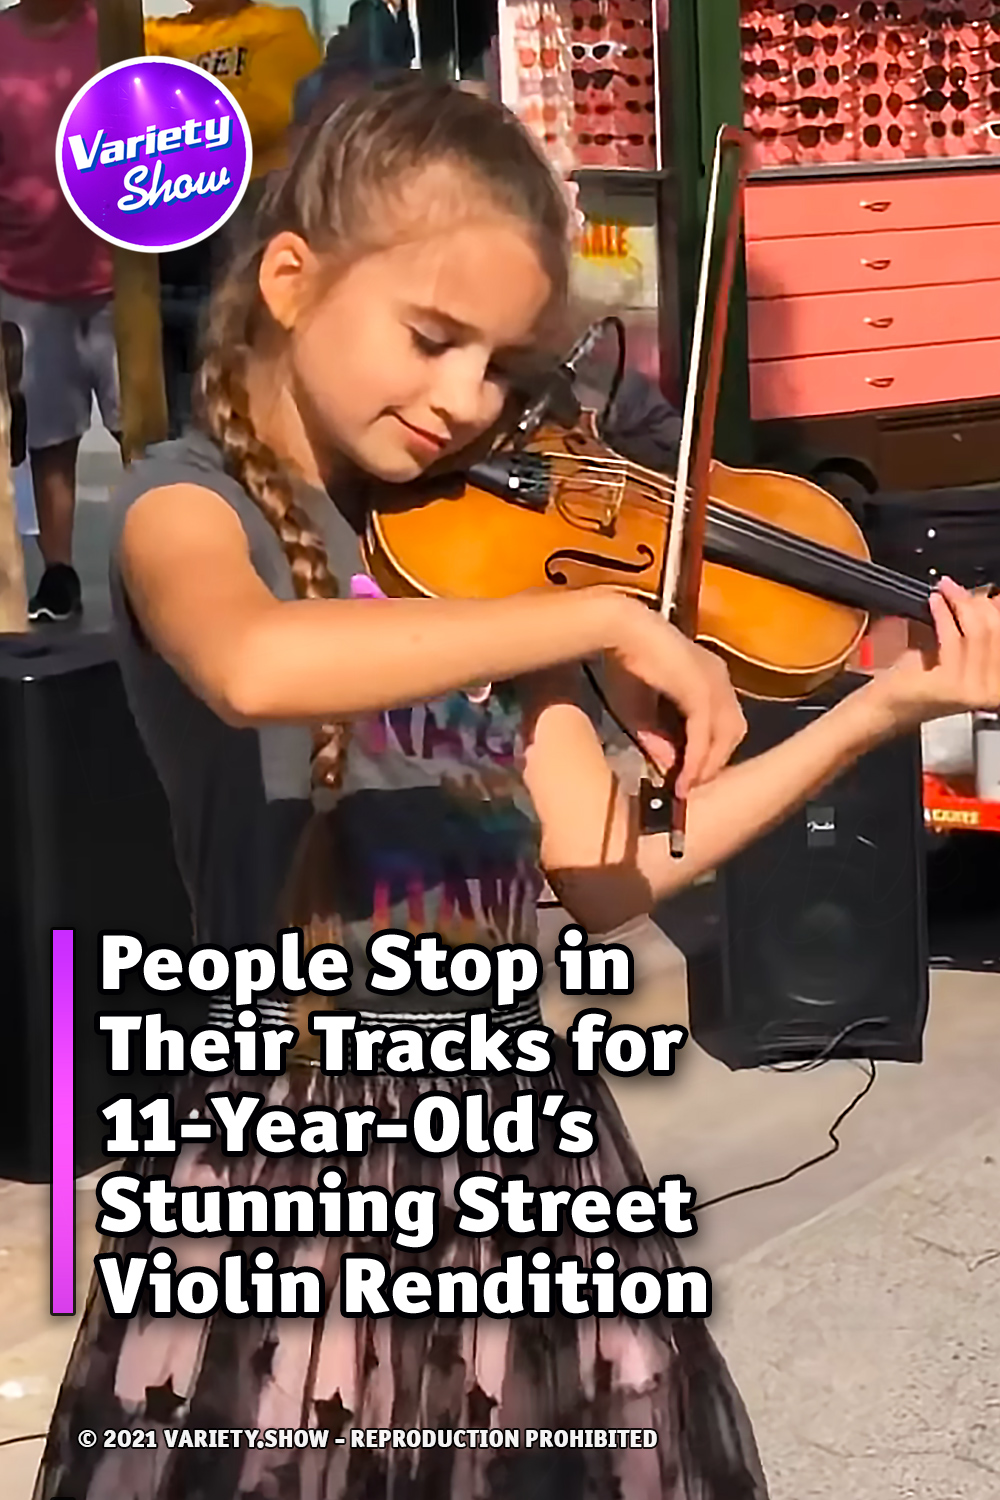 People Stop in Their Tracks for 11-Year-Old’s Stunning Street Violin Rendition